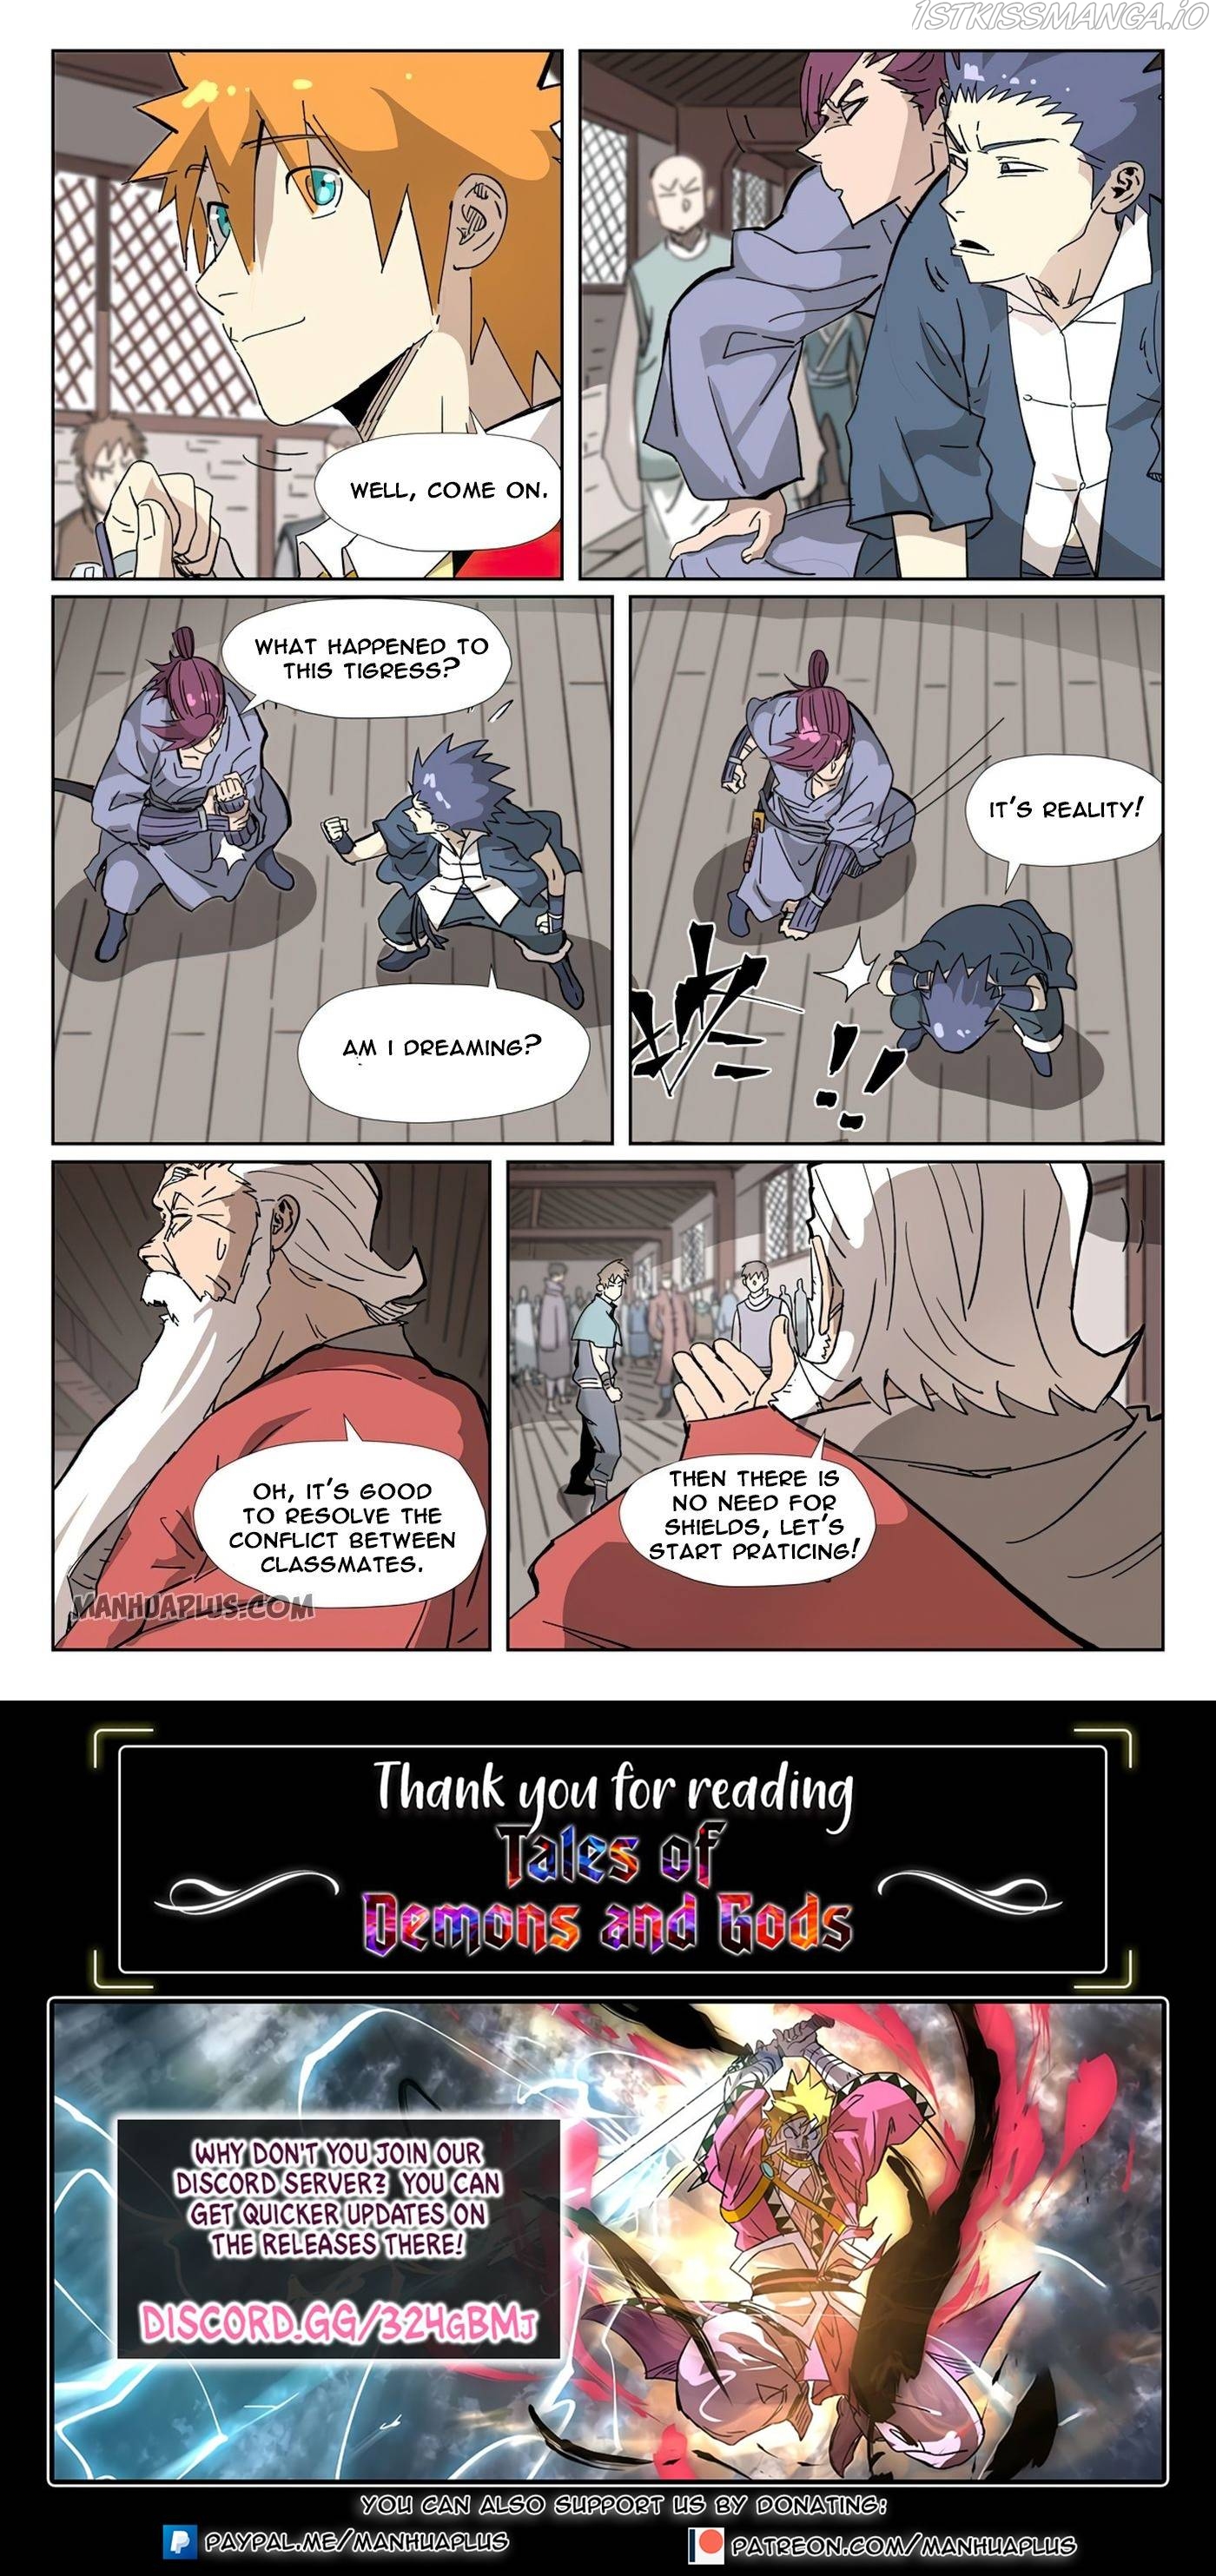 Tales of Demons and Gods Manhua Chapter 330.5 - Page 9